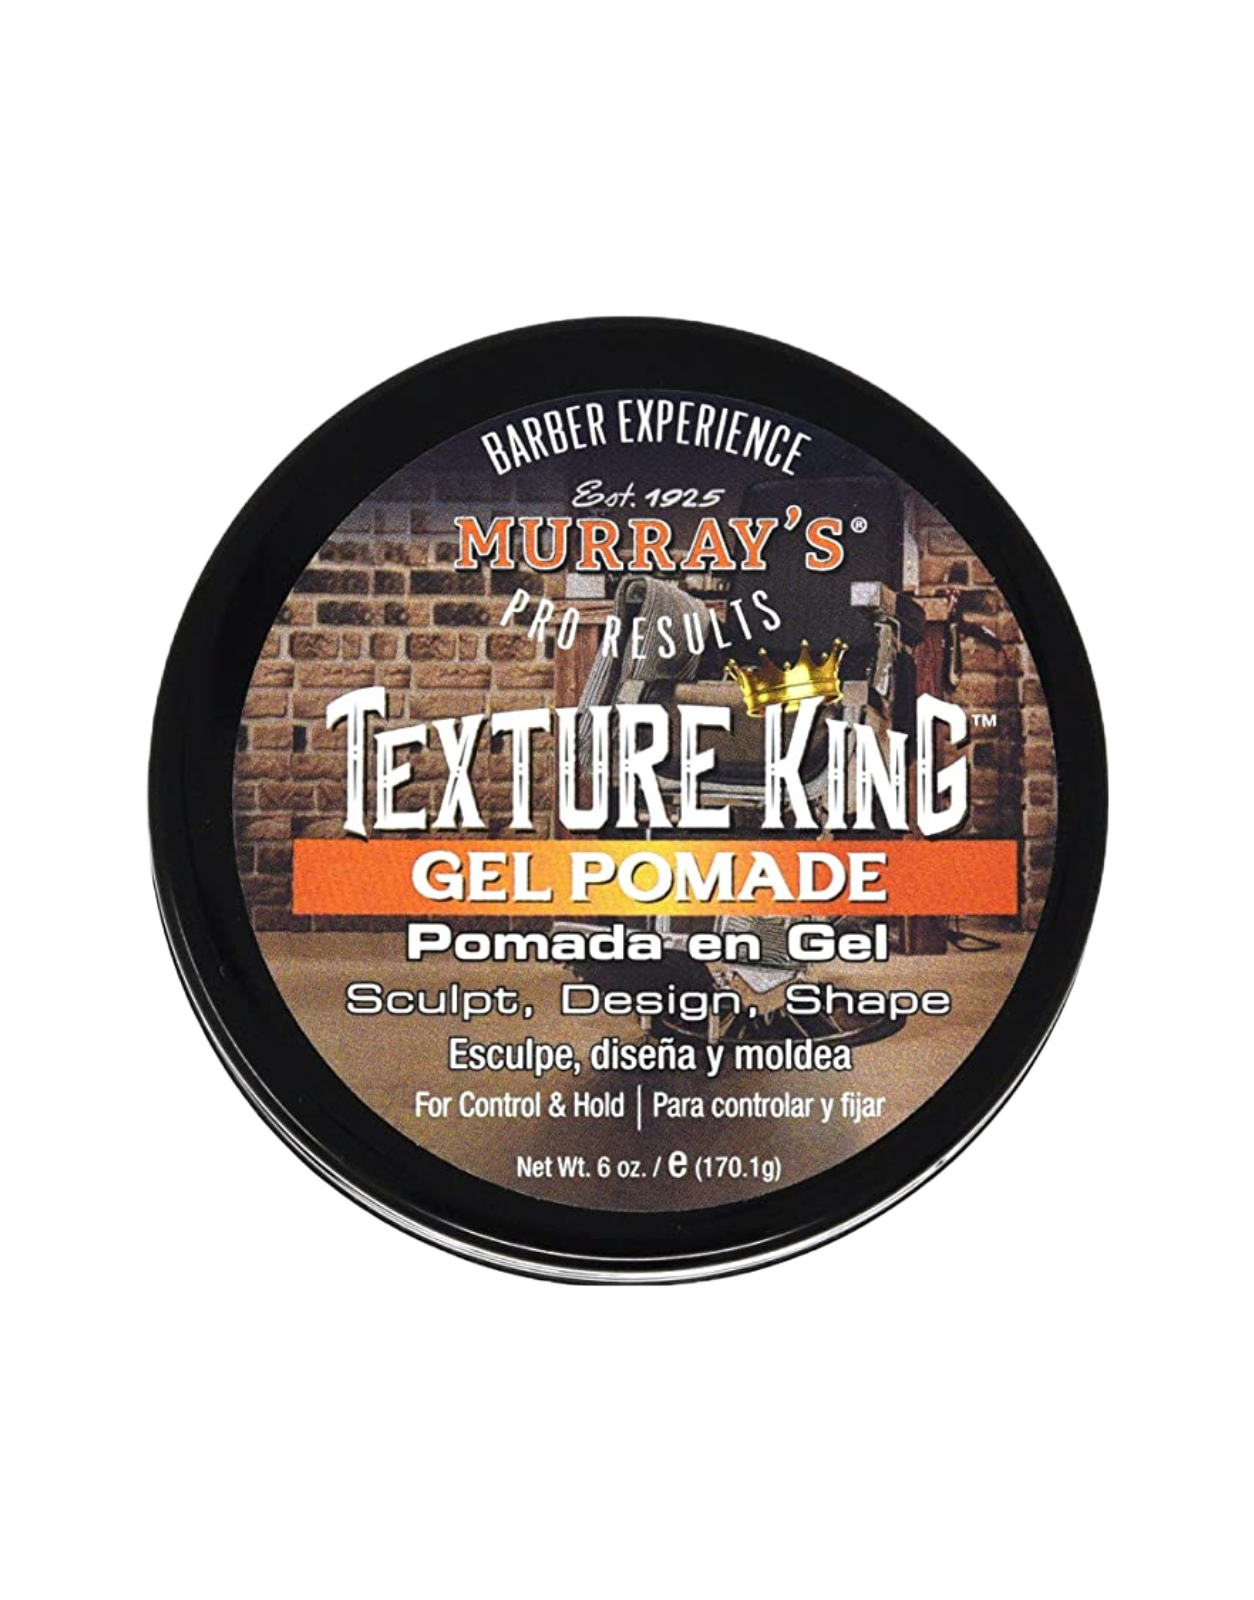 Murray's - Texture King Gel Pomade